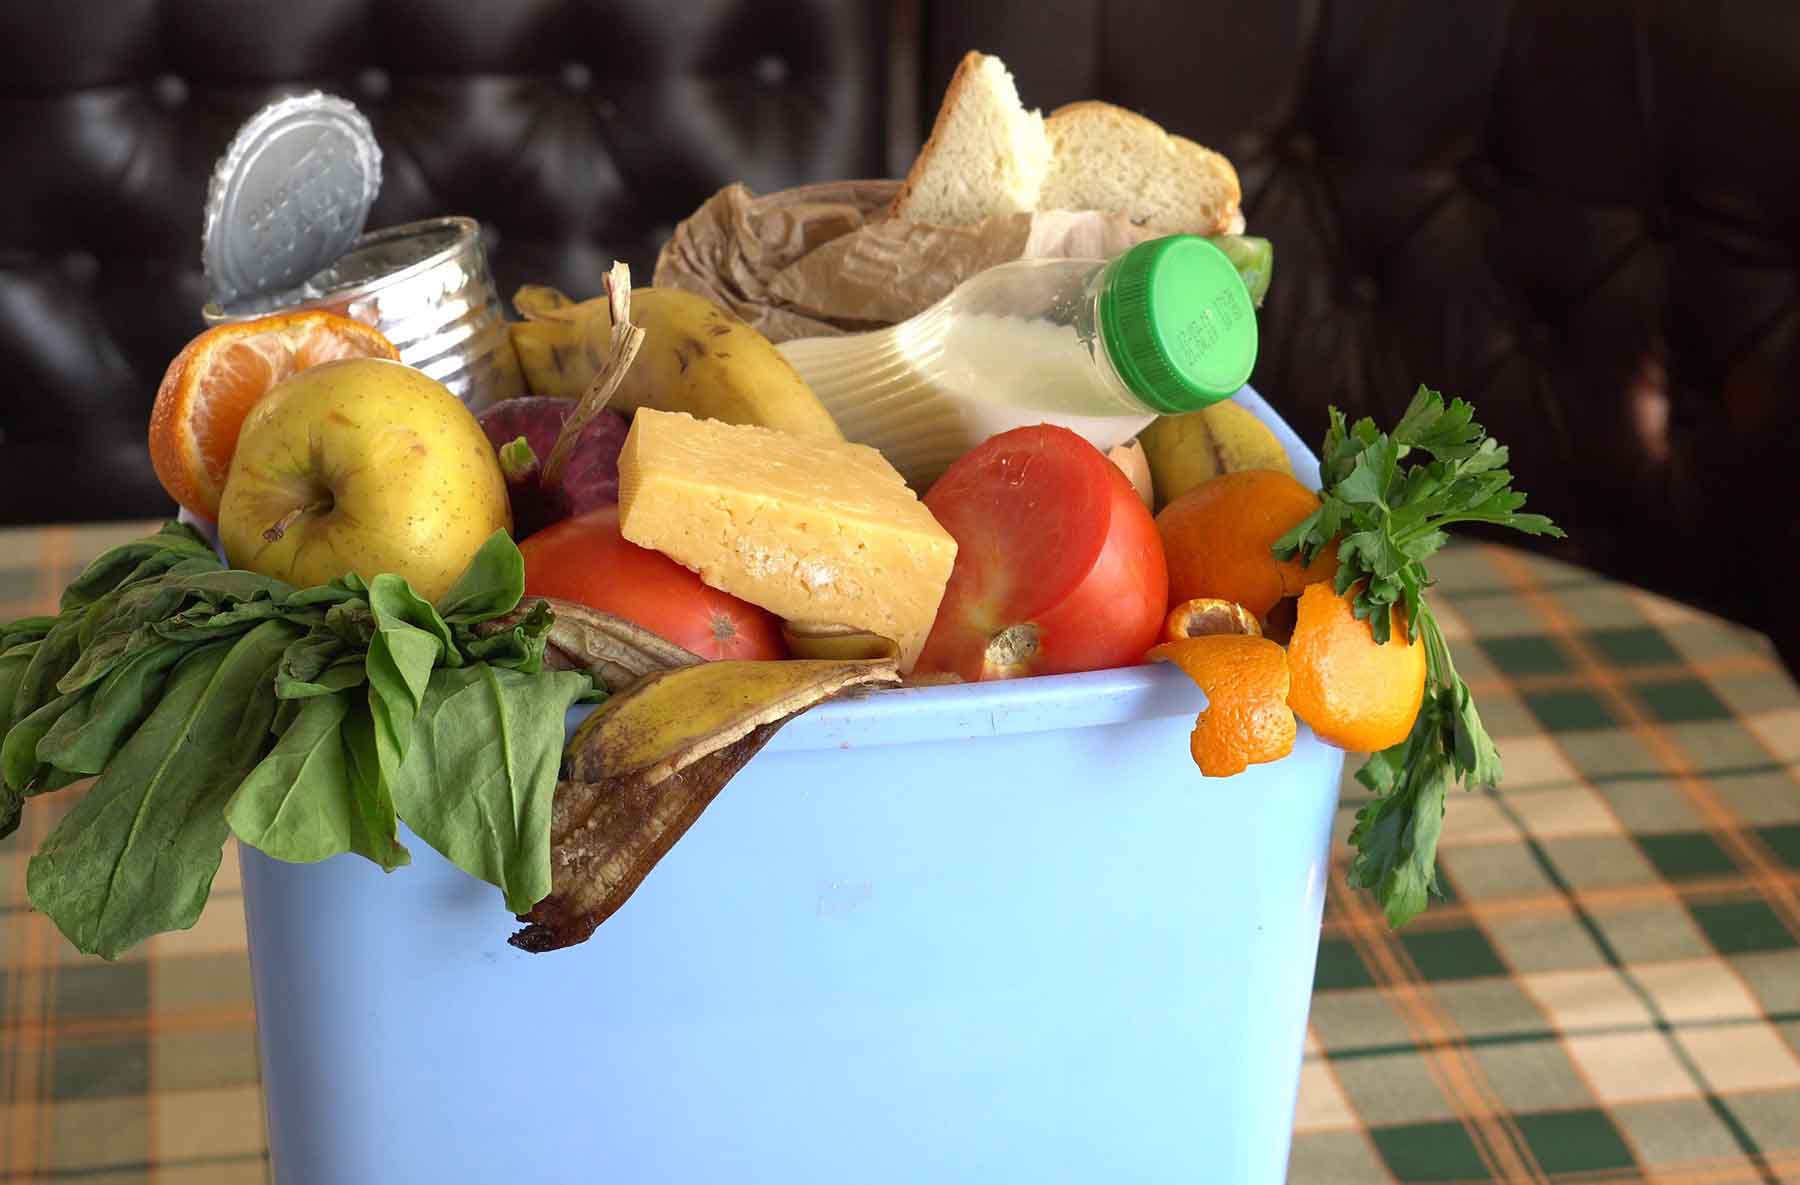 If you like saving money and reducing food waste, this